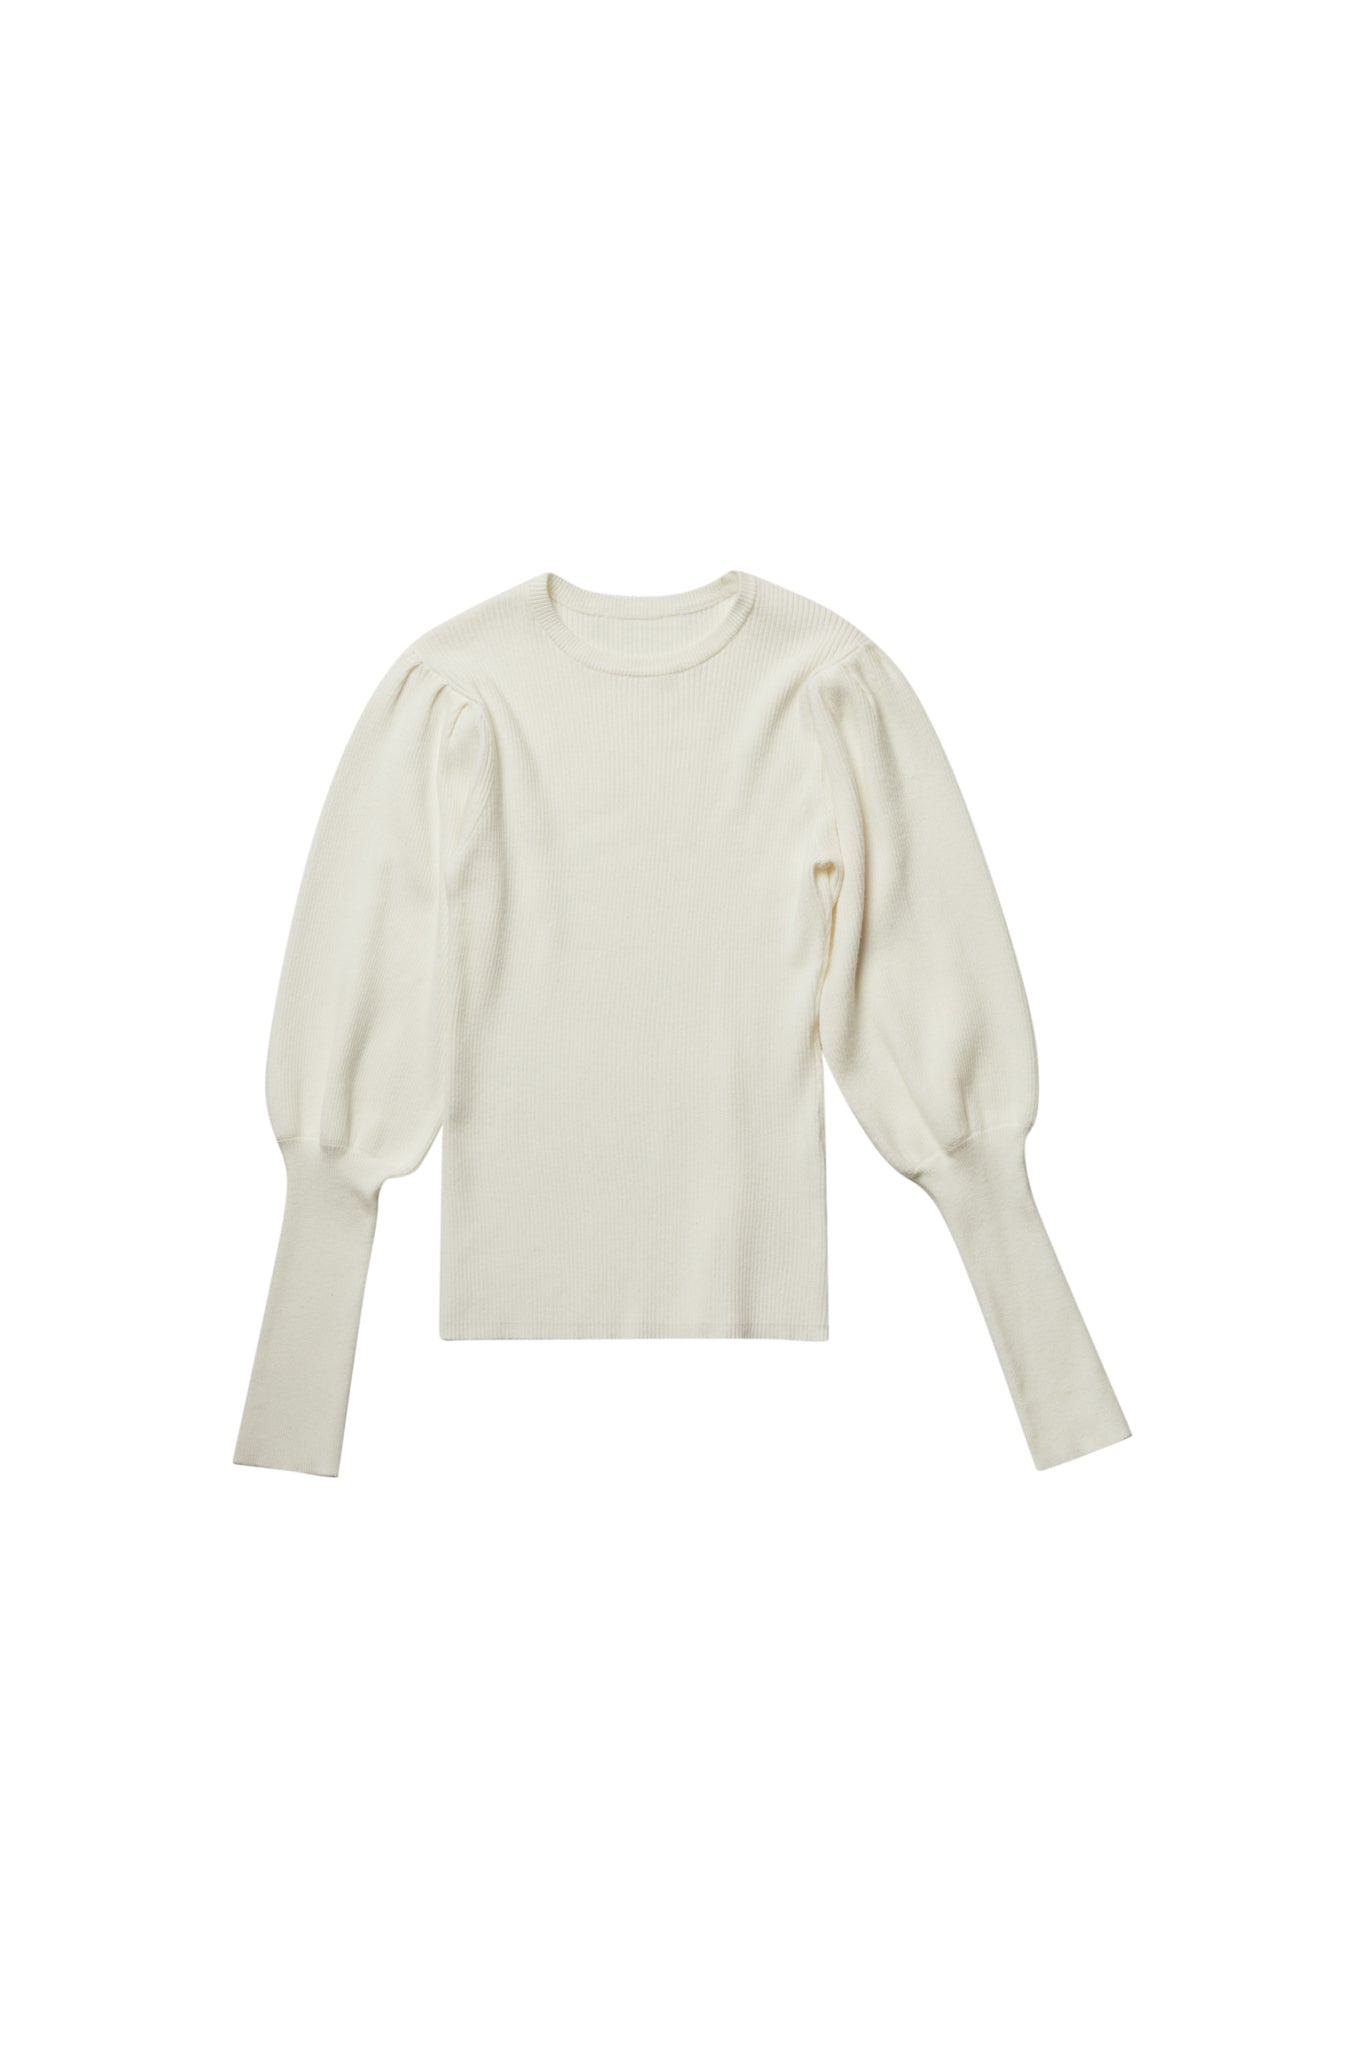 Puff Sleeves Sweater in Ivory #8140